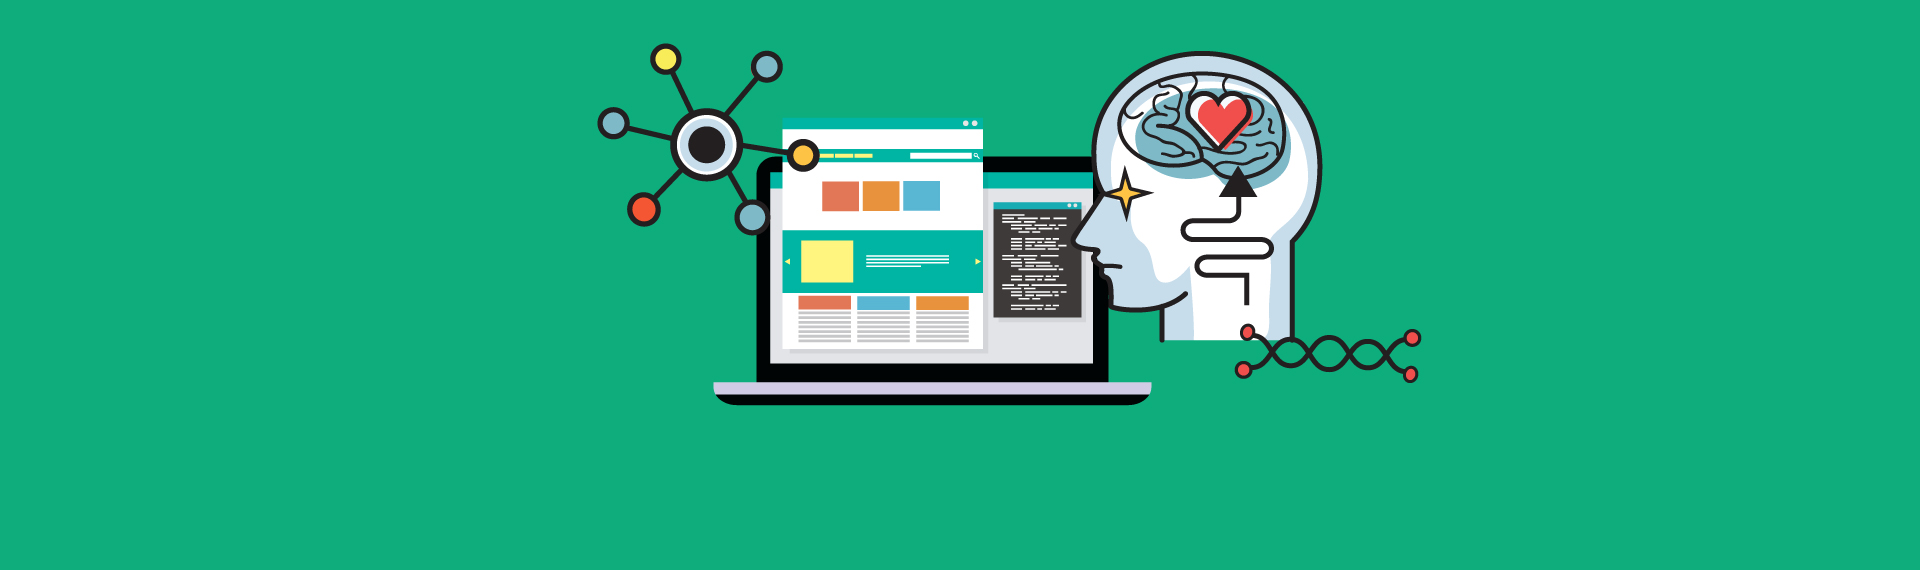 Neuromarketing in Web Design: Ways to Connect With Visitors’ Brains